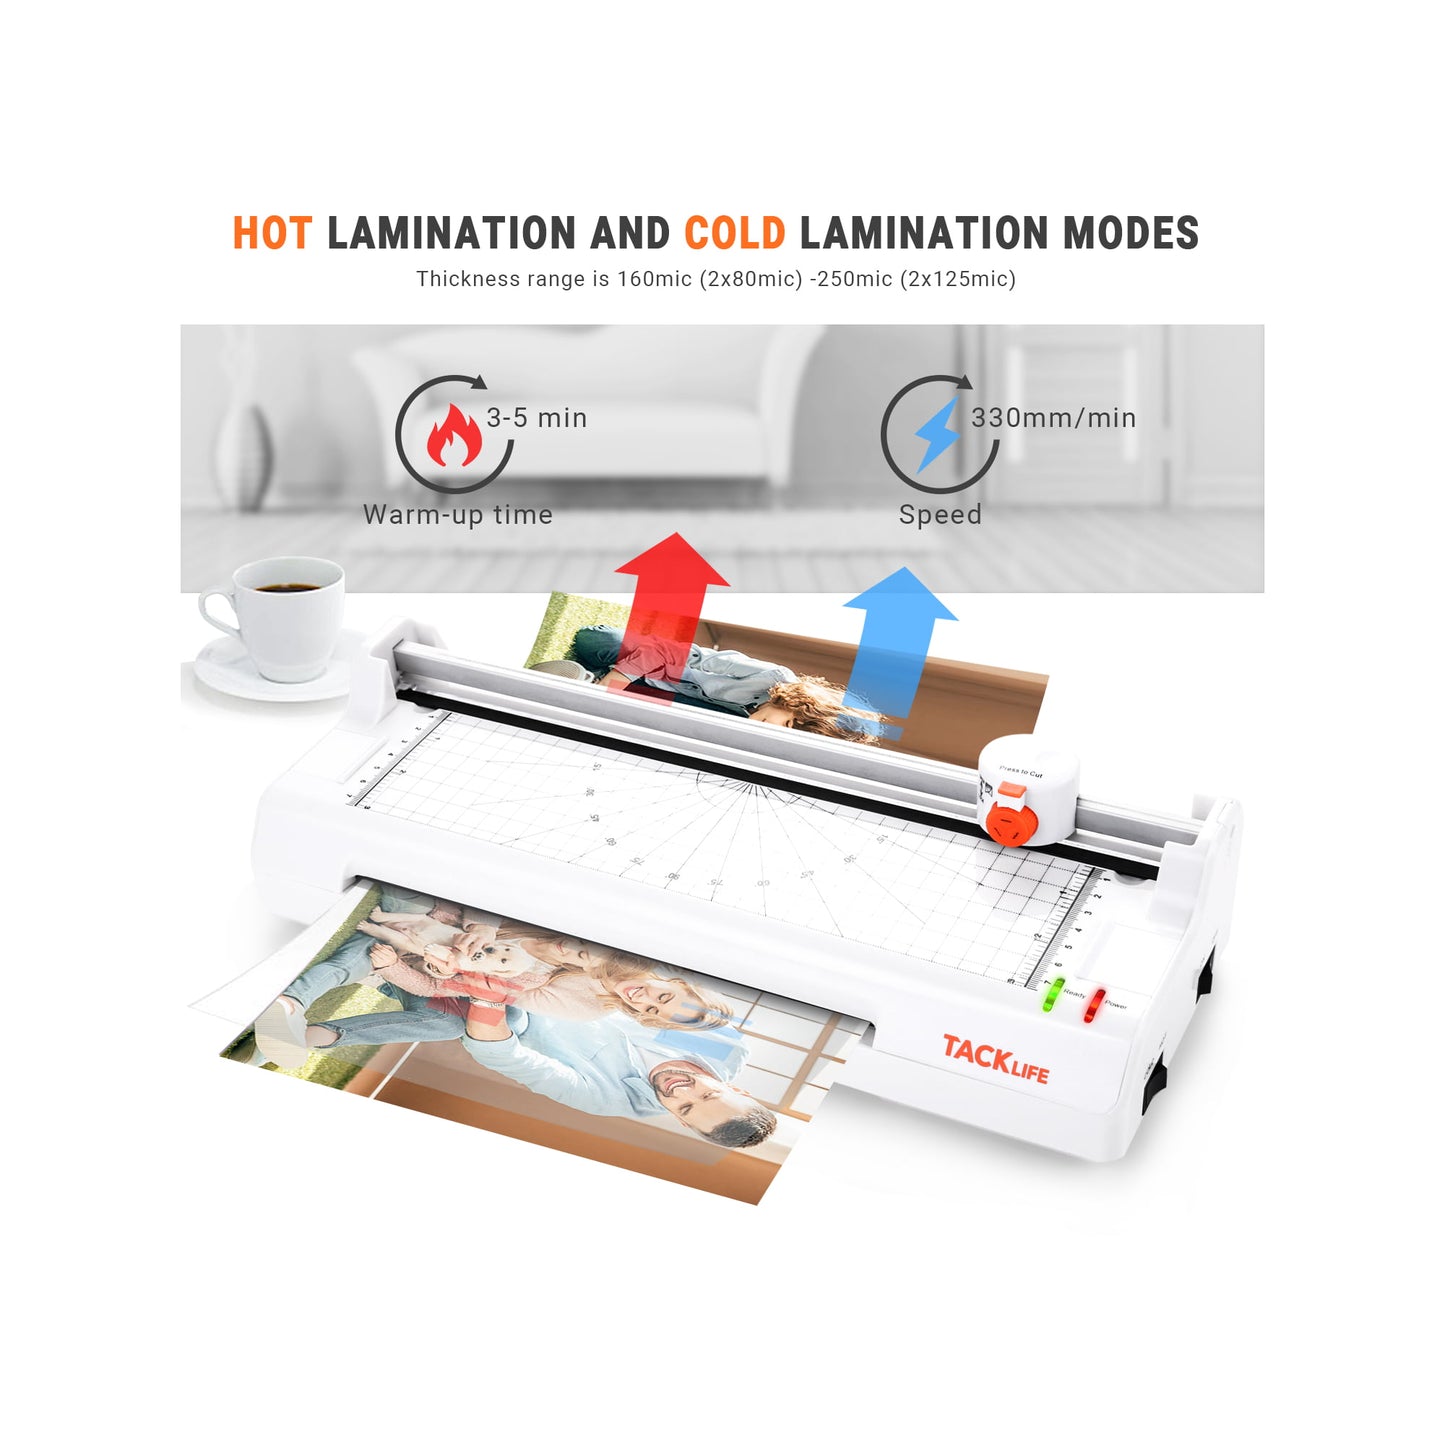 TACKLIFE Laminator Machine, 5-in-1 Hot & Cold 40-Second Preheating Laminator for Office/Home Use-MTL02